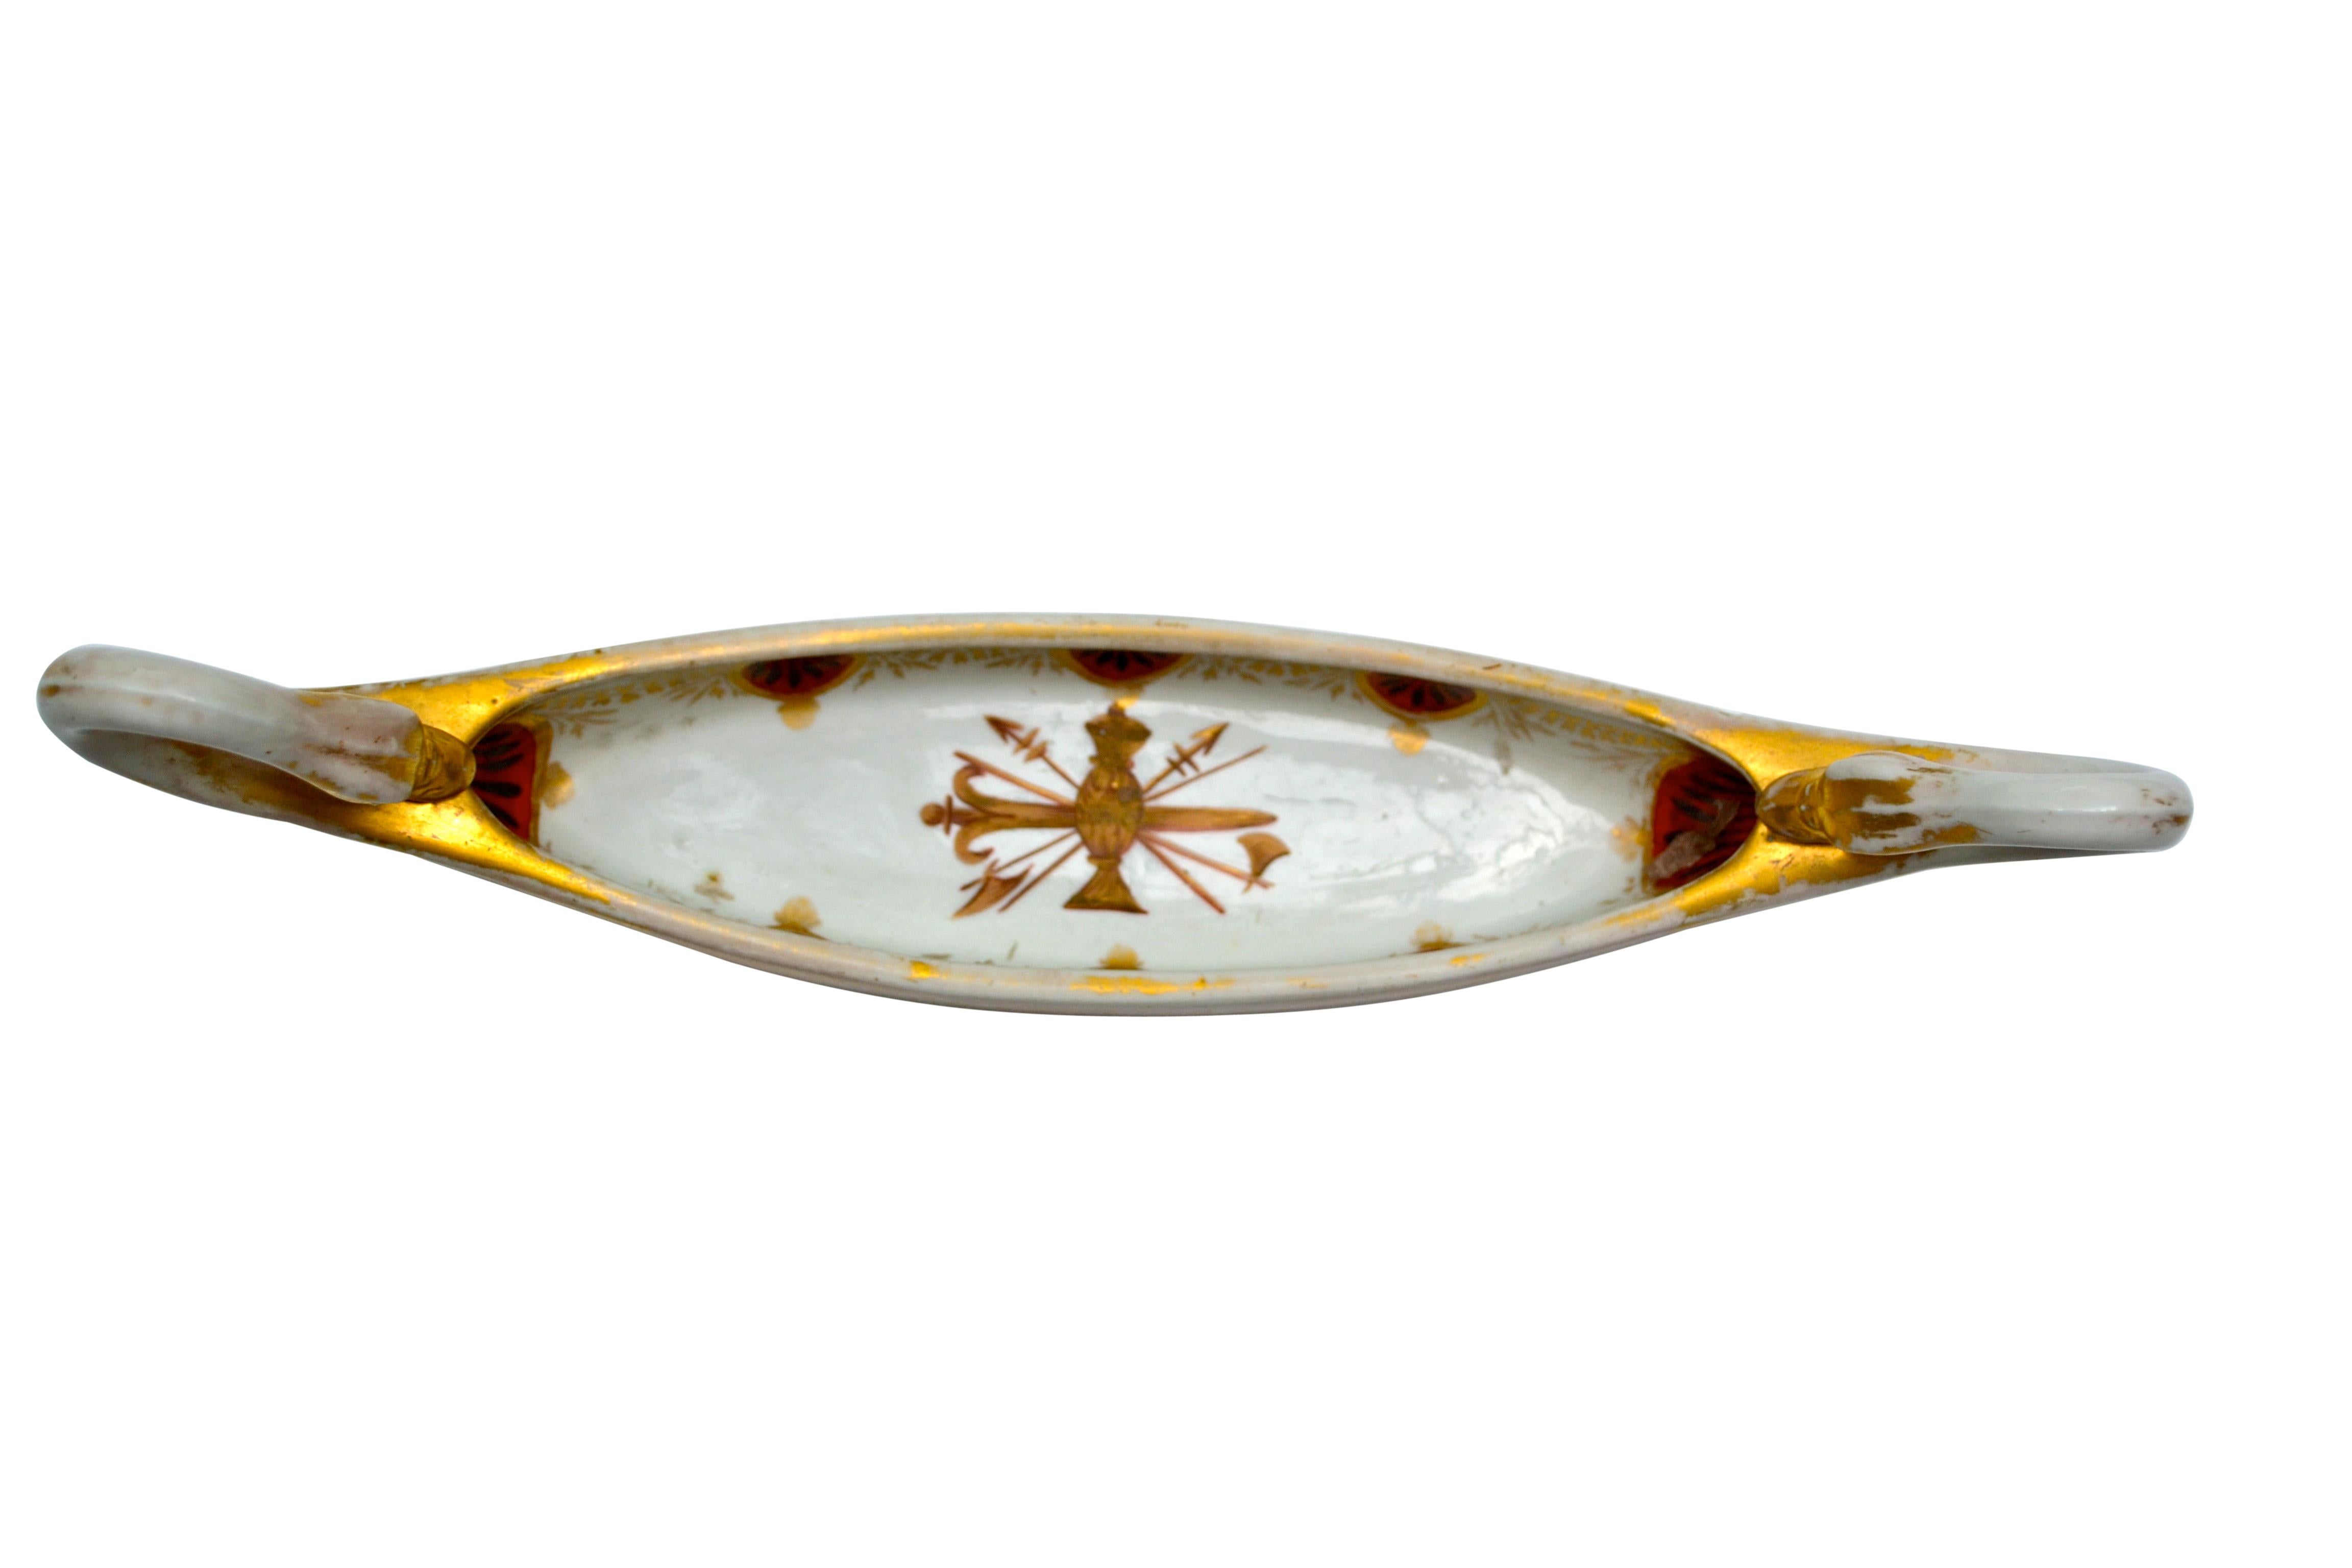 An extremely rare early 19th century Spode spoon tray, the white porcelain body highly decorated in gilt scrolls, coral stars and coral medallions decorated with acanthus, etc. and stylized swan handles.